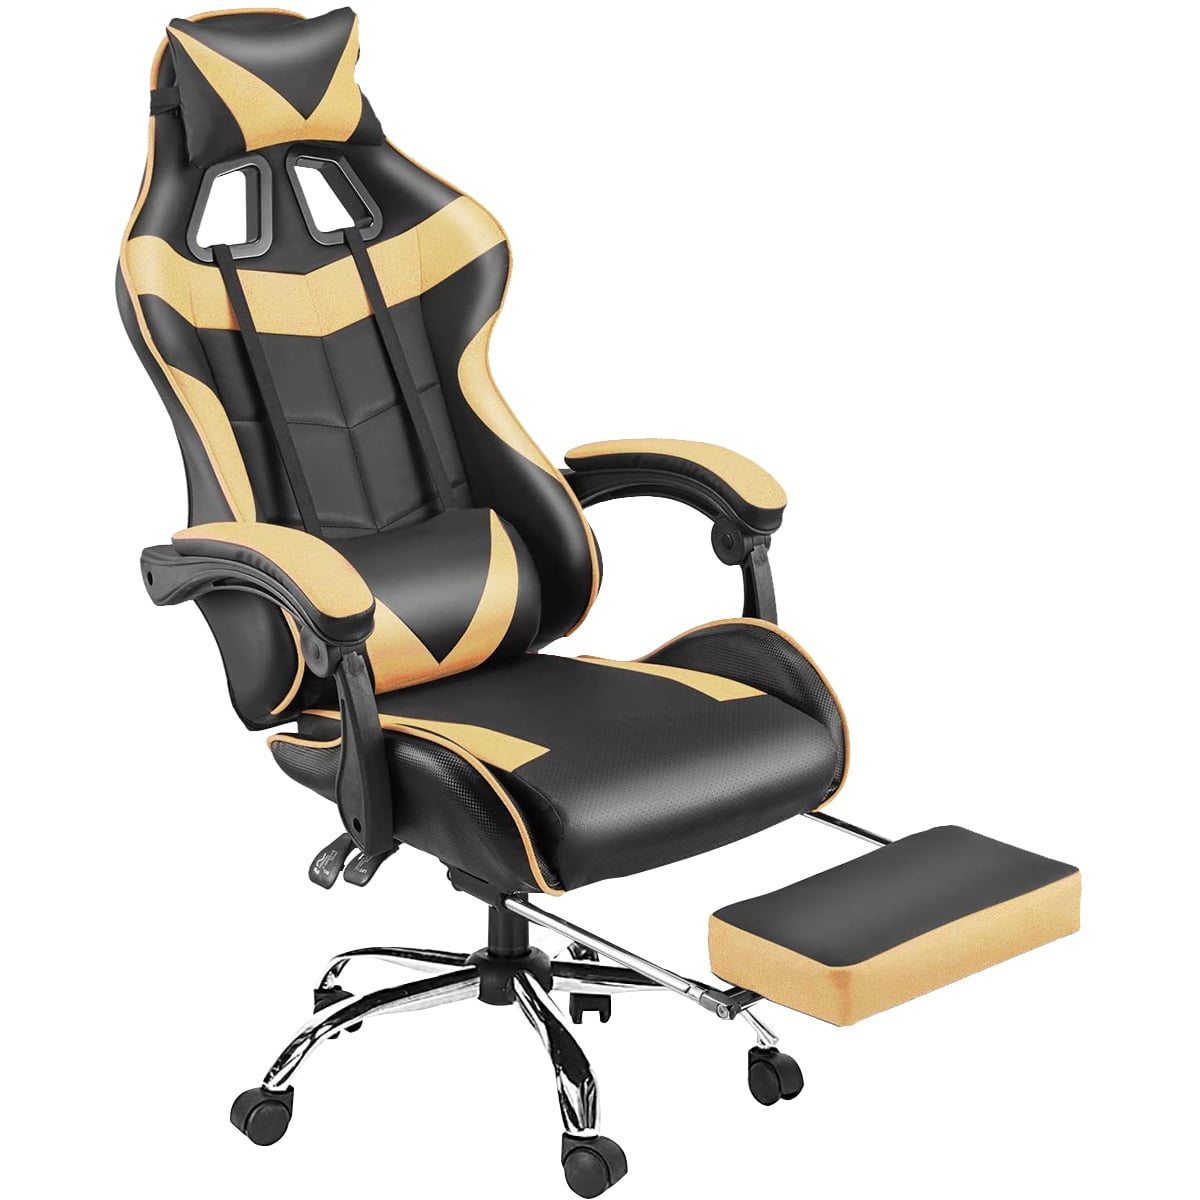 Details about   Executive Chair Office Leather Gaming High Back Desk Swivel Tilt Seating Lumbar 